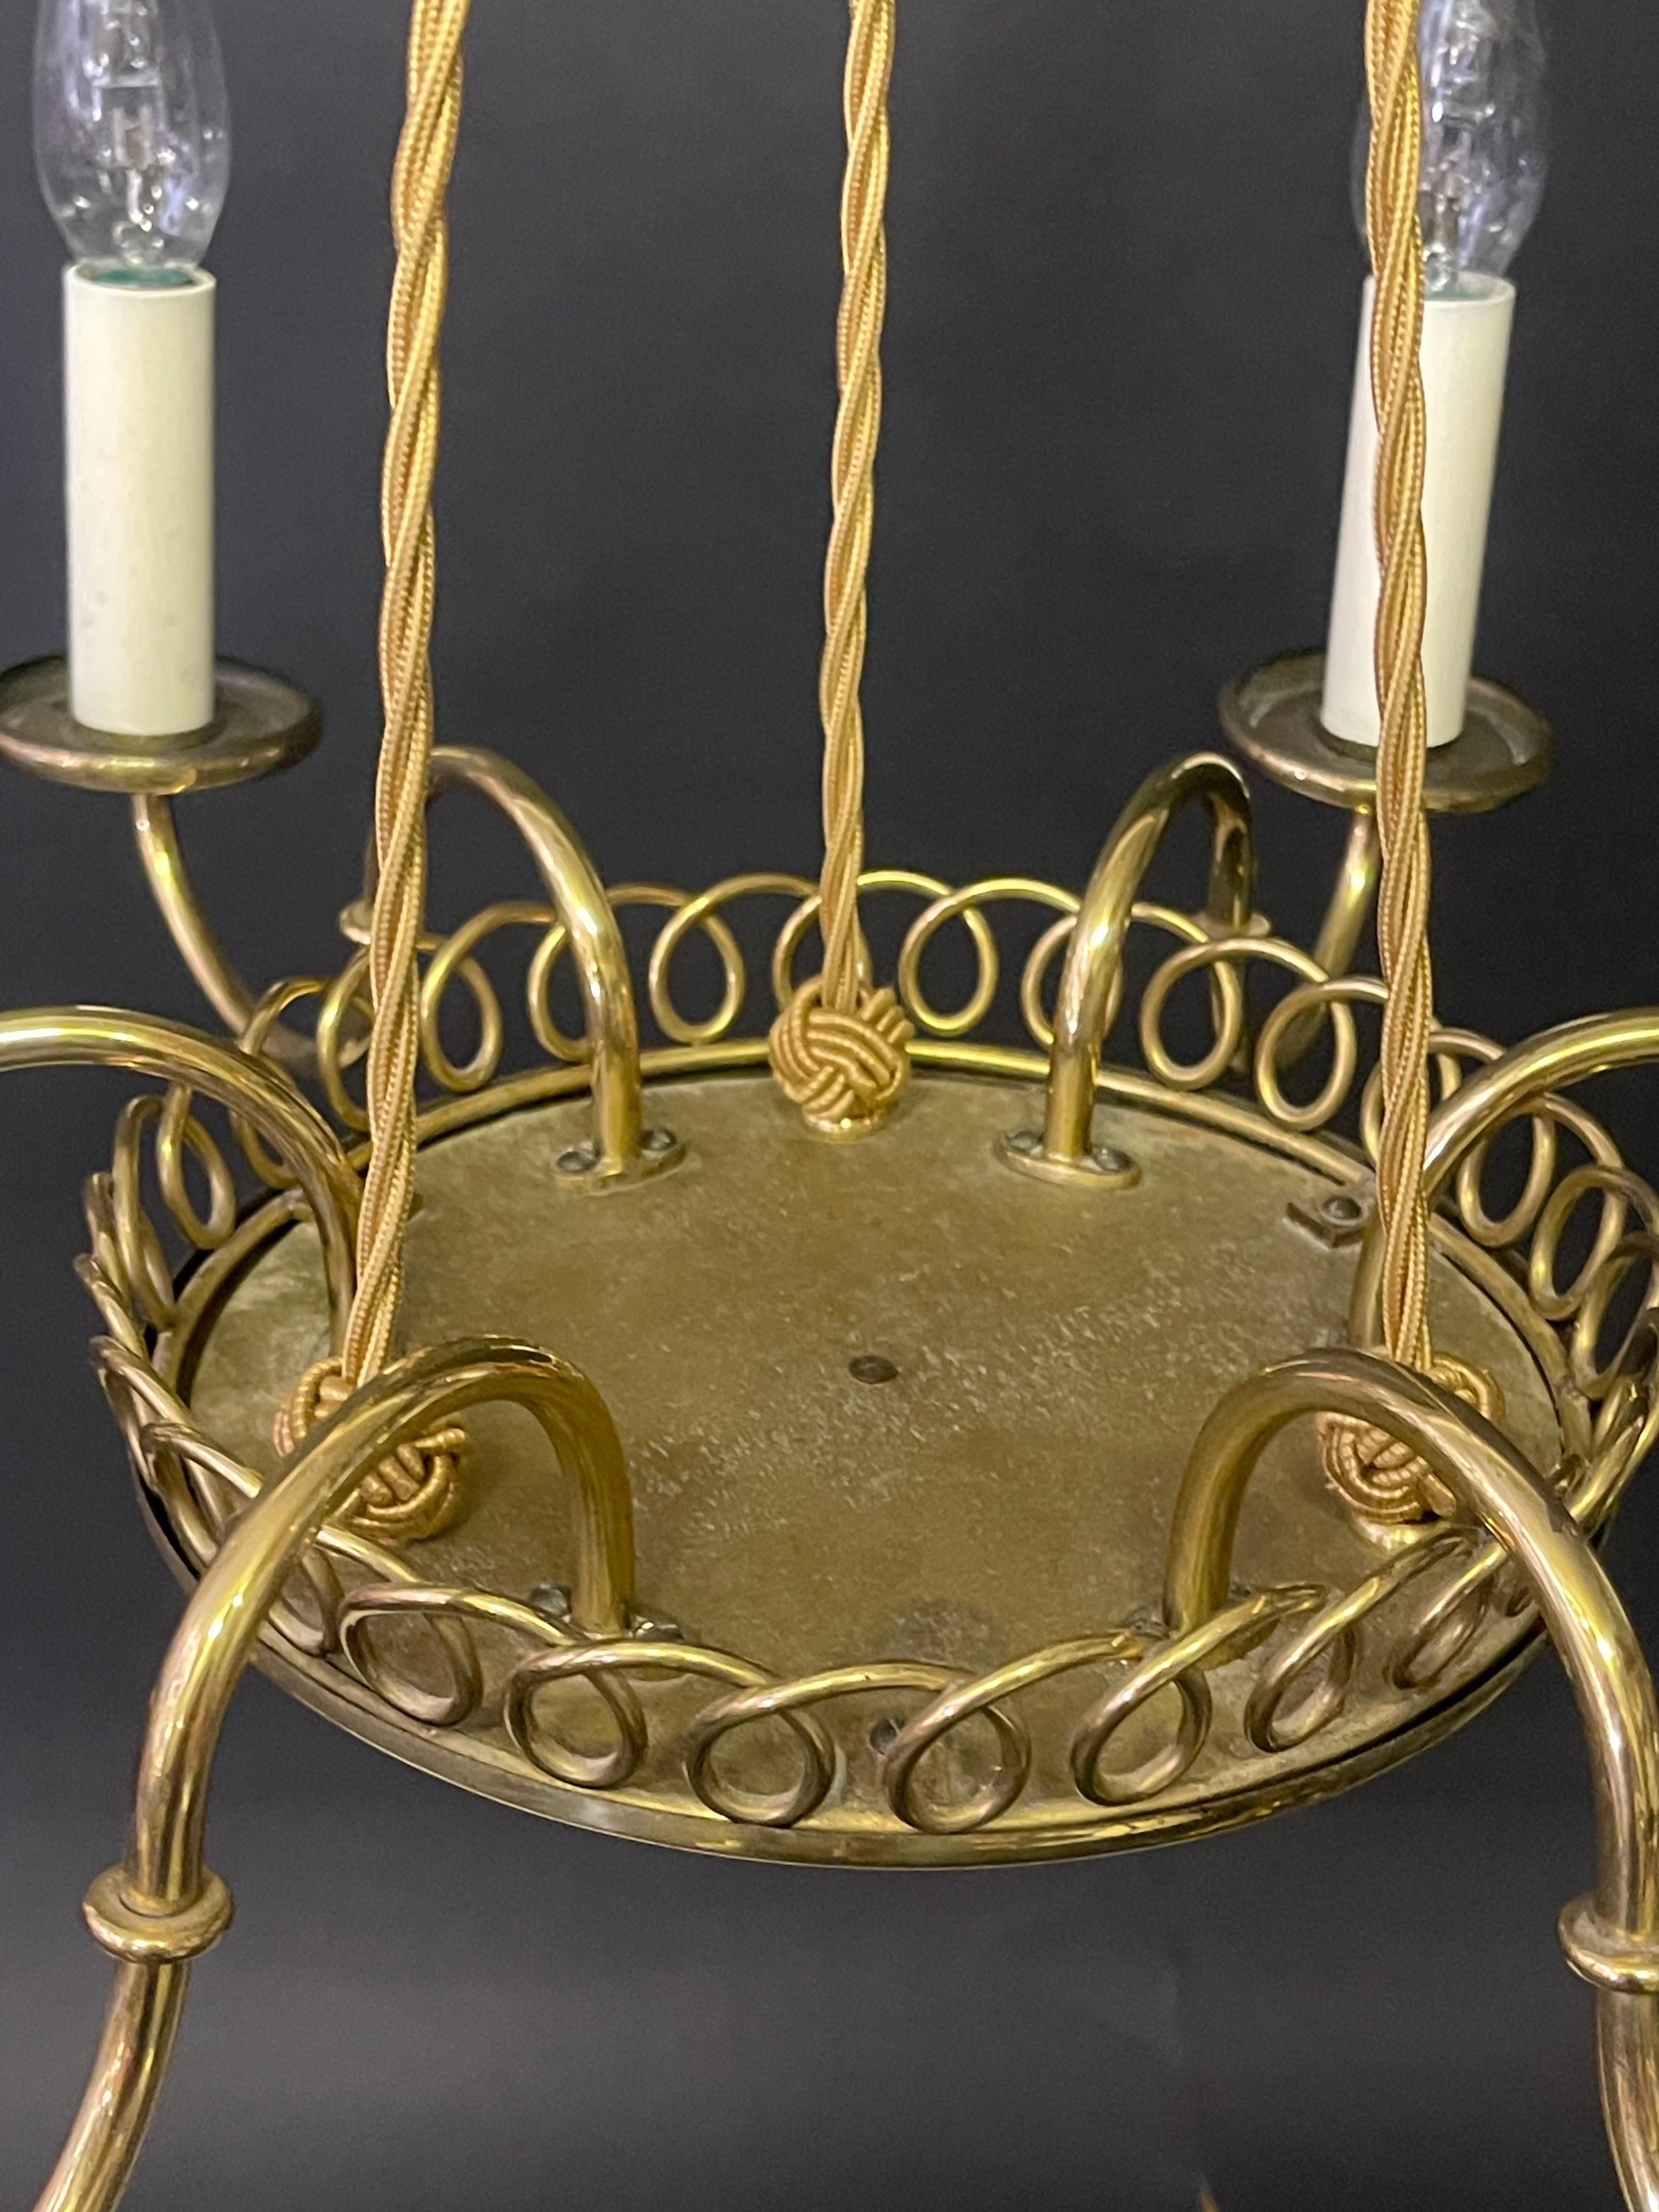 Mid-20th Century  Delicate Polished Brass Chandelier by Josef Frank, 1950s (restored) For Sale